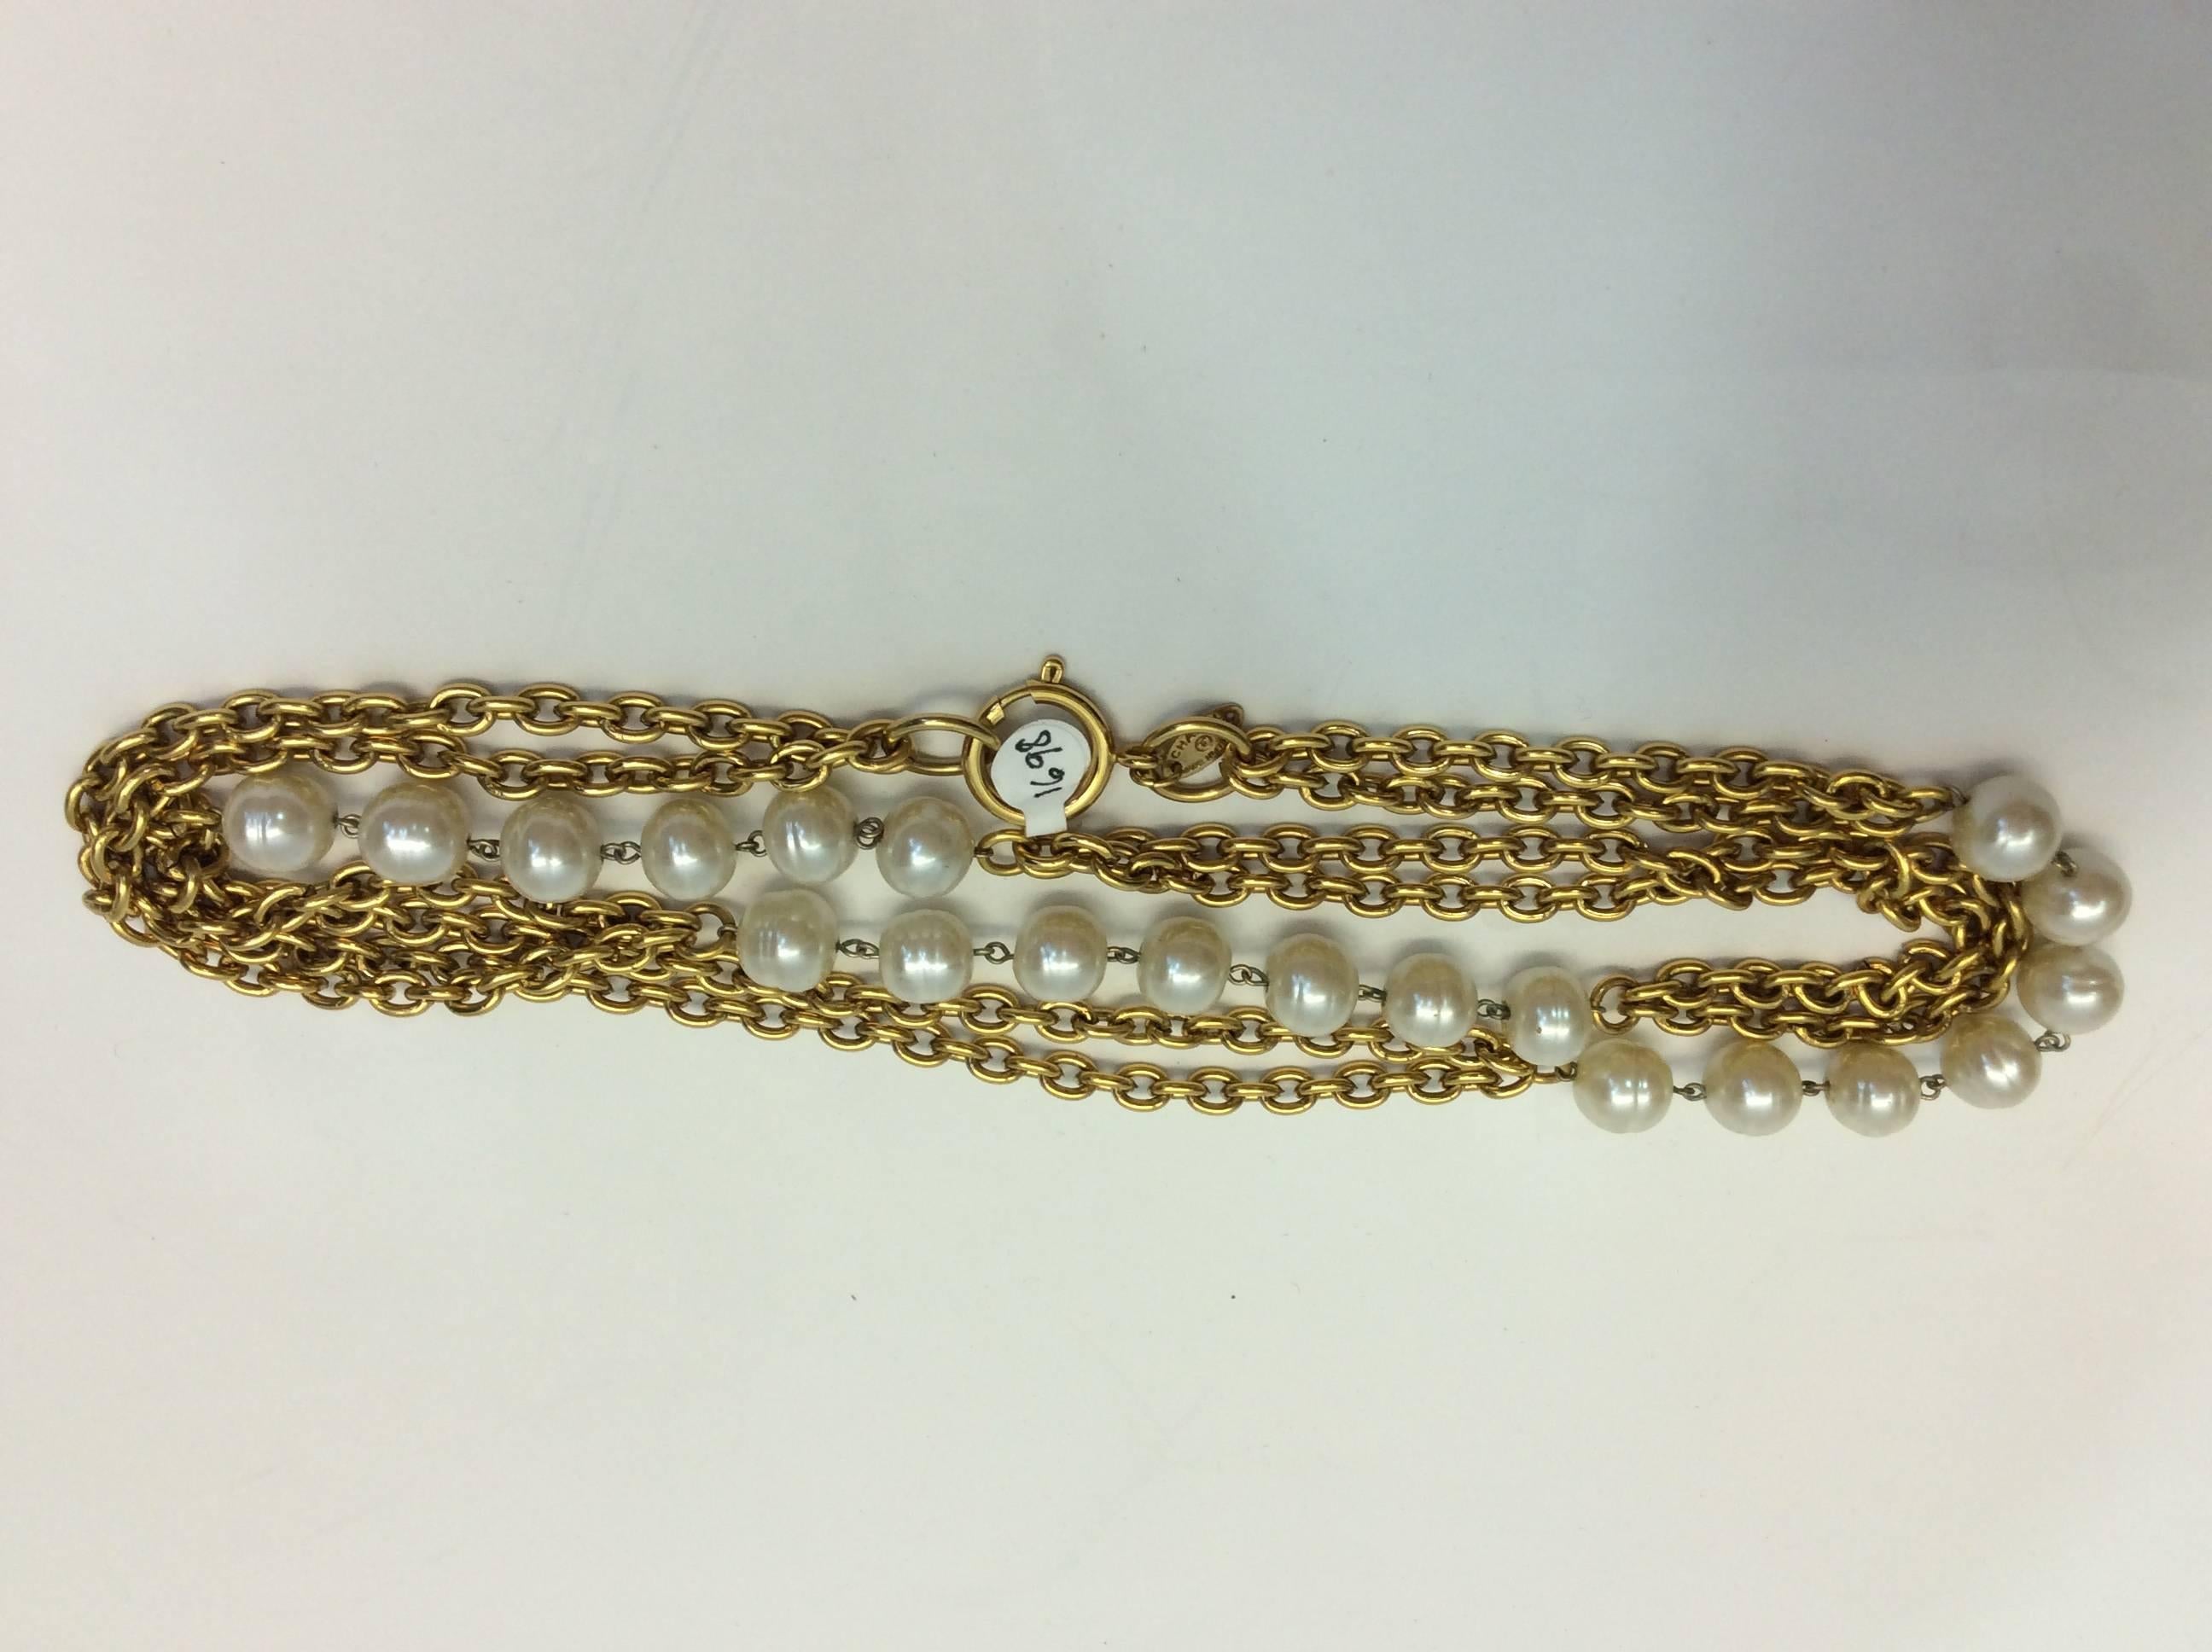 Chanel Gold Plated Chain Necklace with Pearl Details In Good Condition For Sale In Narberth, PA